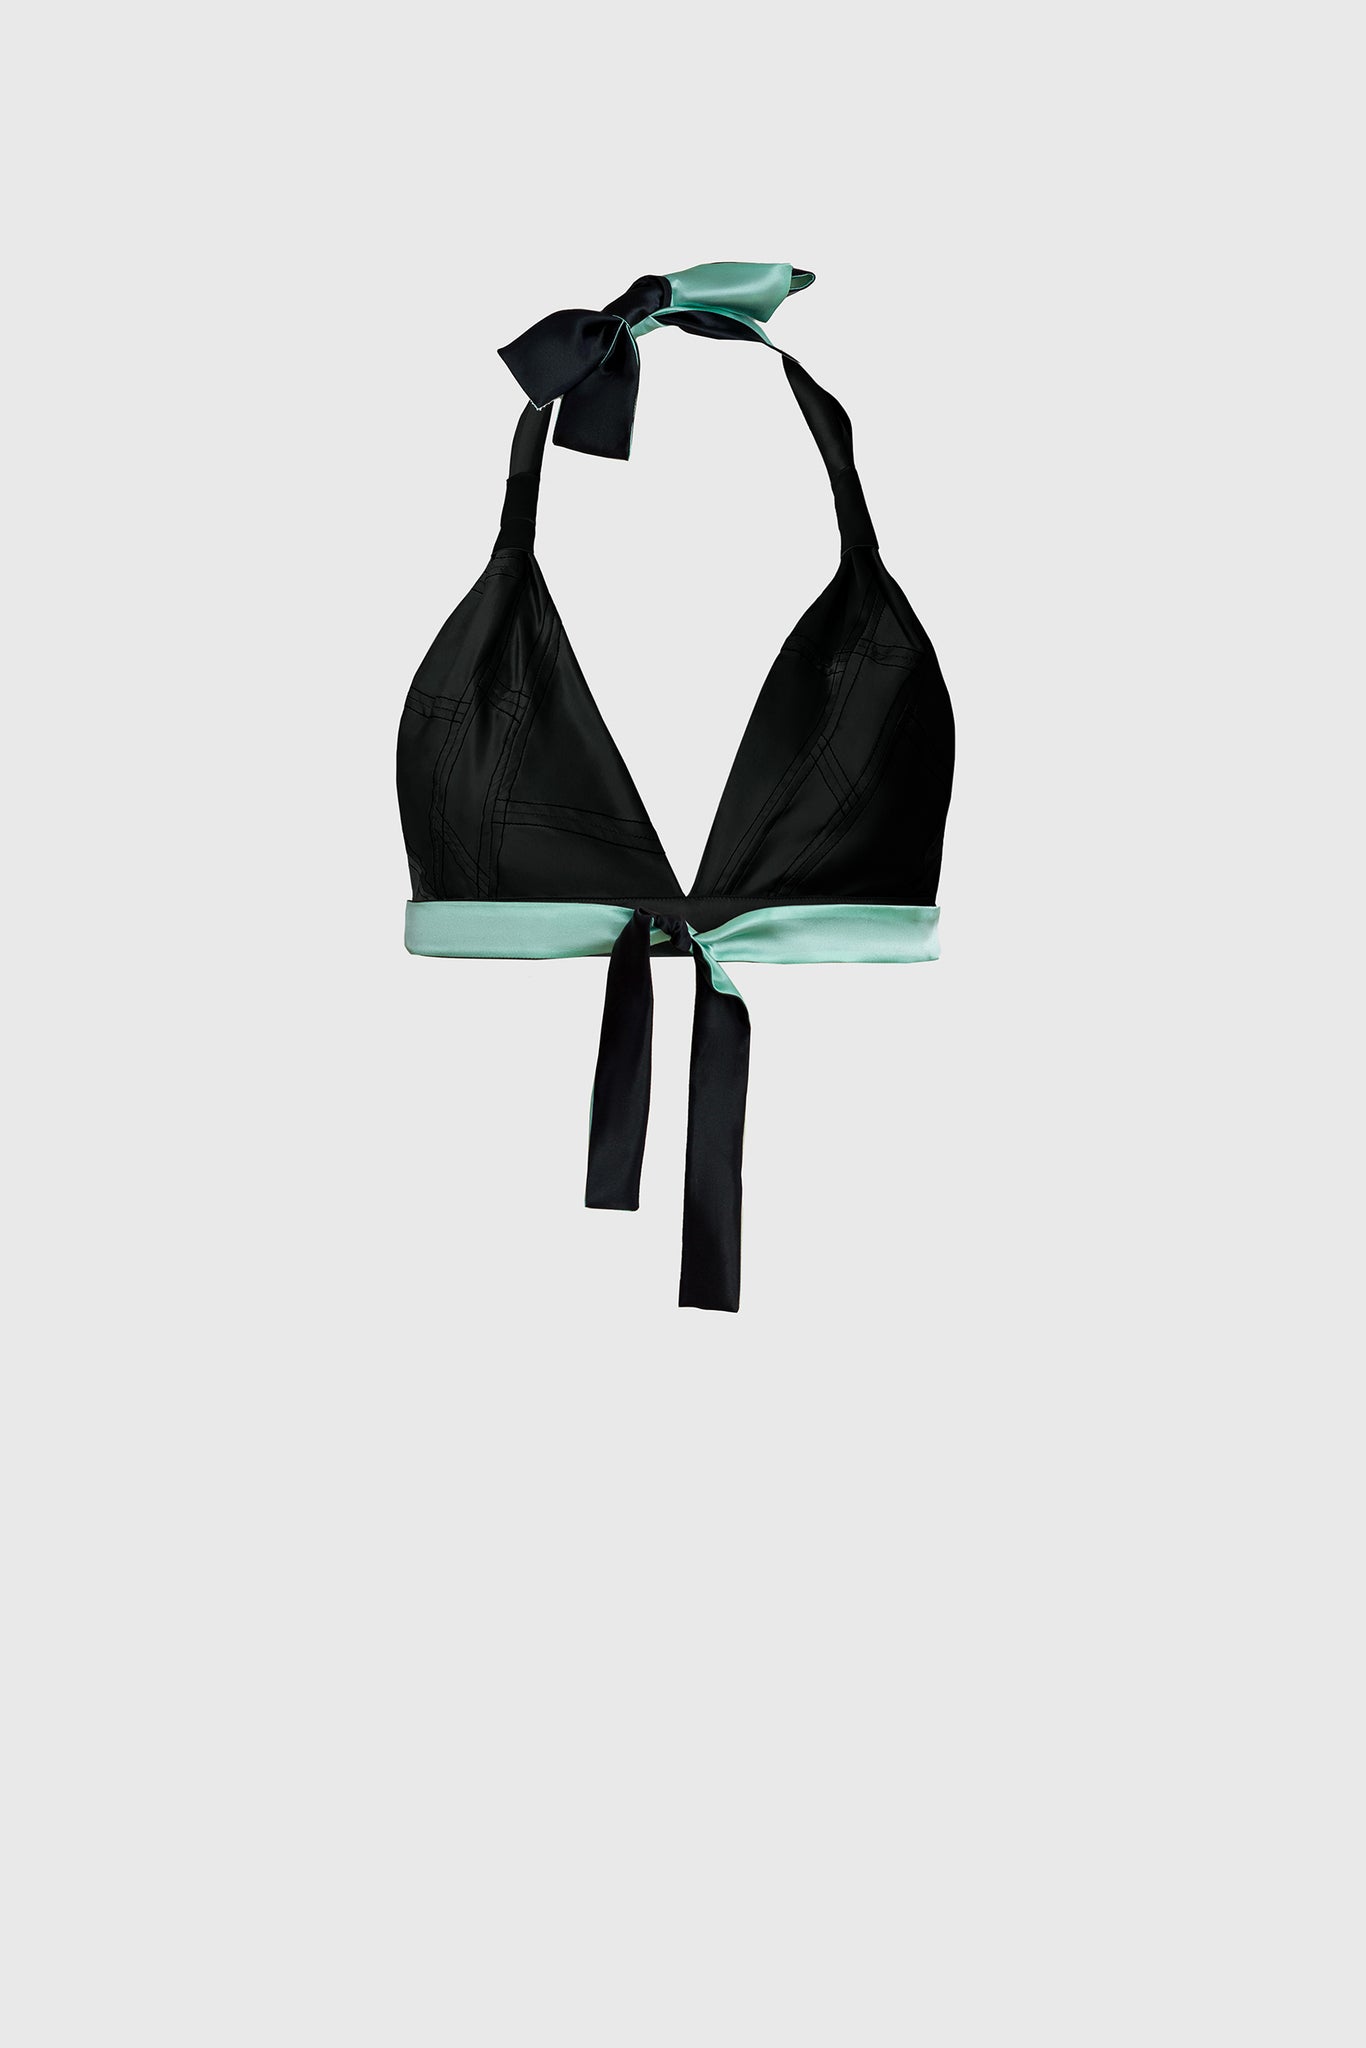 two tone color silk bra top, black and light peppermint, full contrast, aquamarine color, match tropical waters, Maldives, Tenerife, Bail style, tie around the neck in  a ribbon, and adjust for your size with back closure, fits small bust or medium large bust